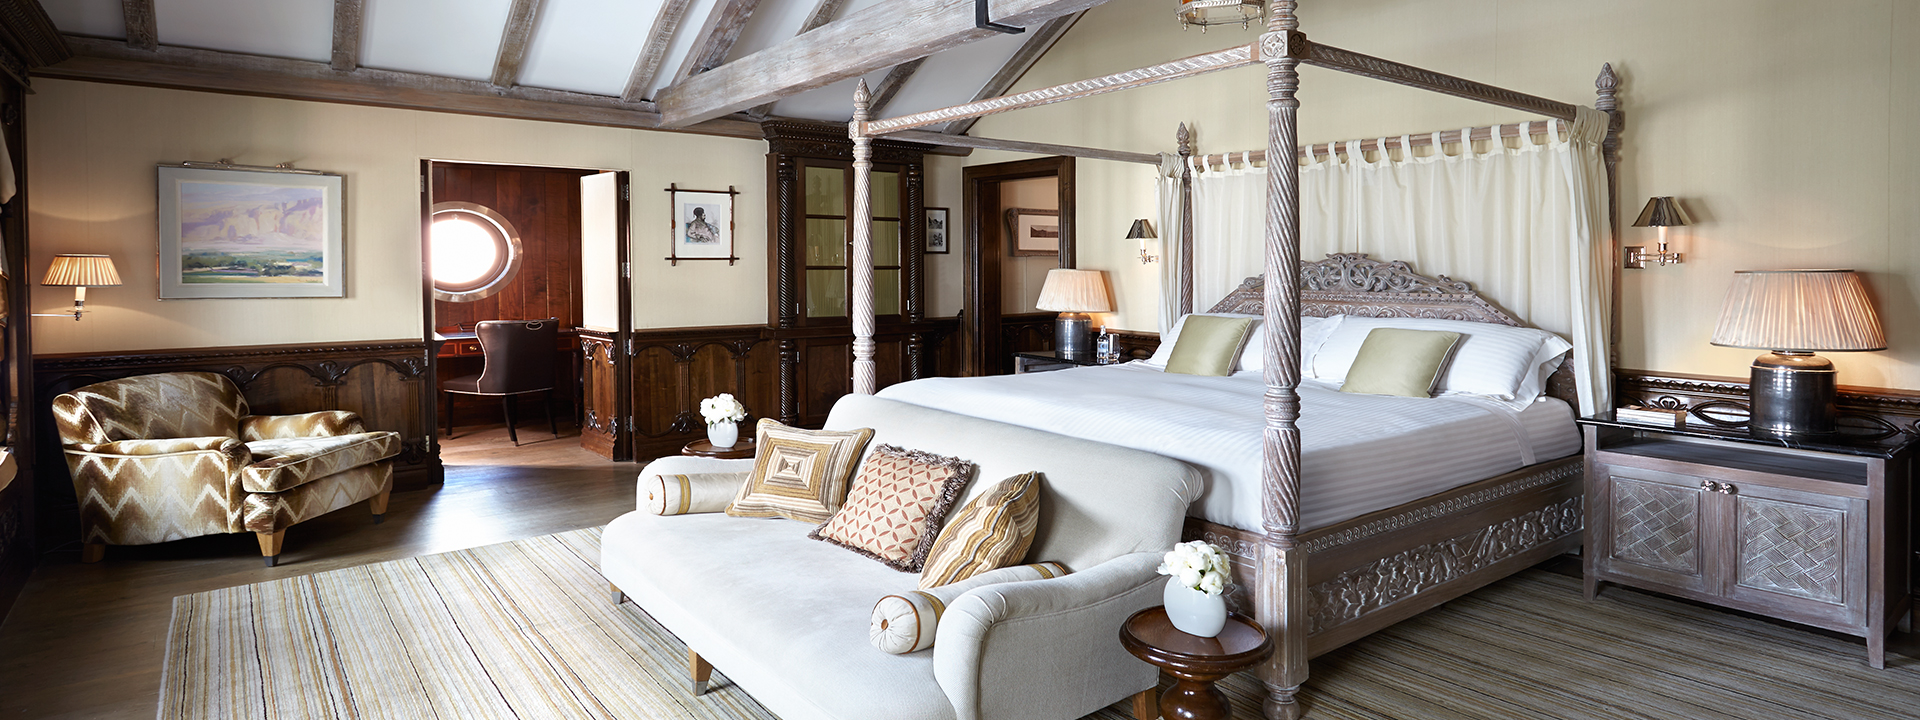 Comfortable and spacious four poster bed 
with a beige wall and wooden furniture in the Princes Lodge Room.